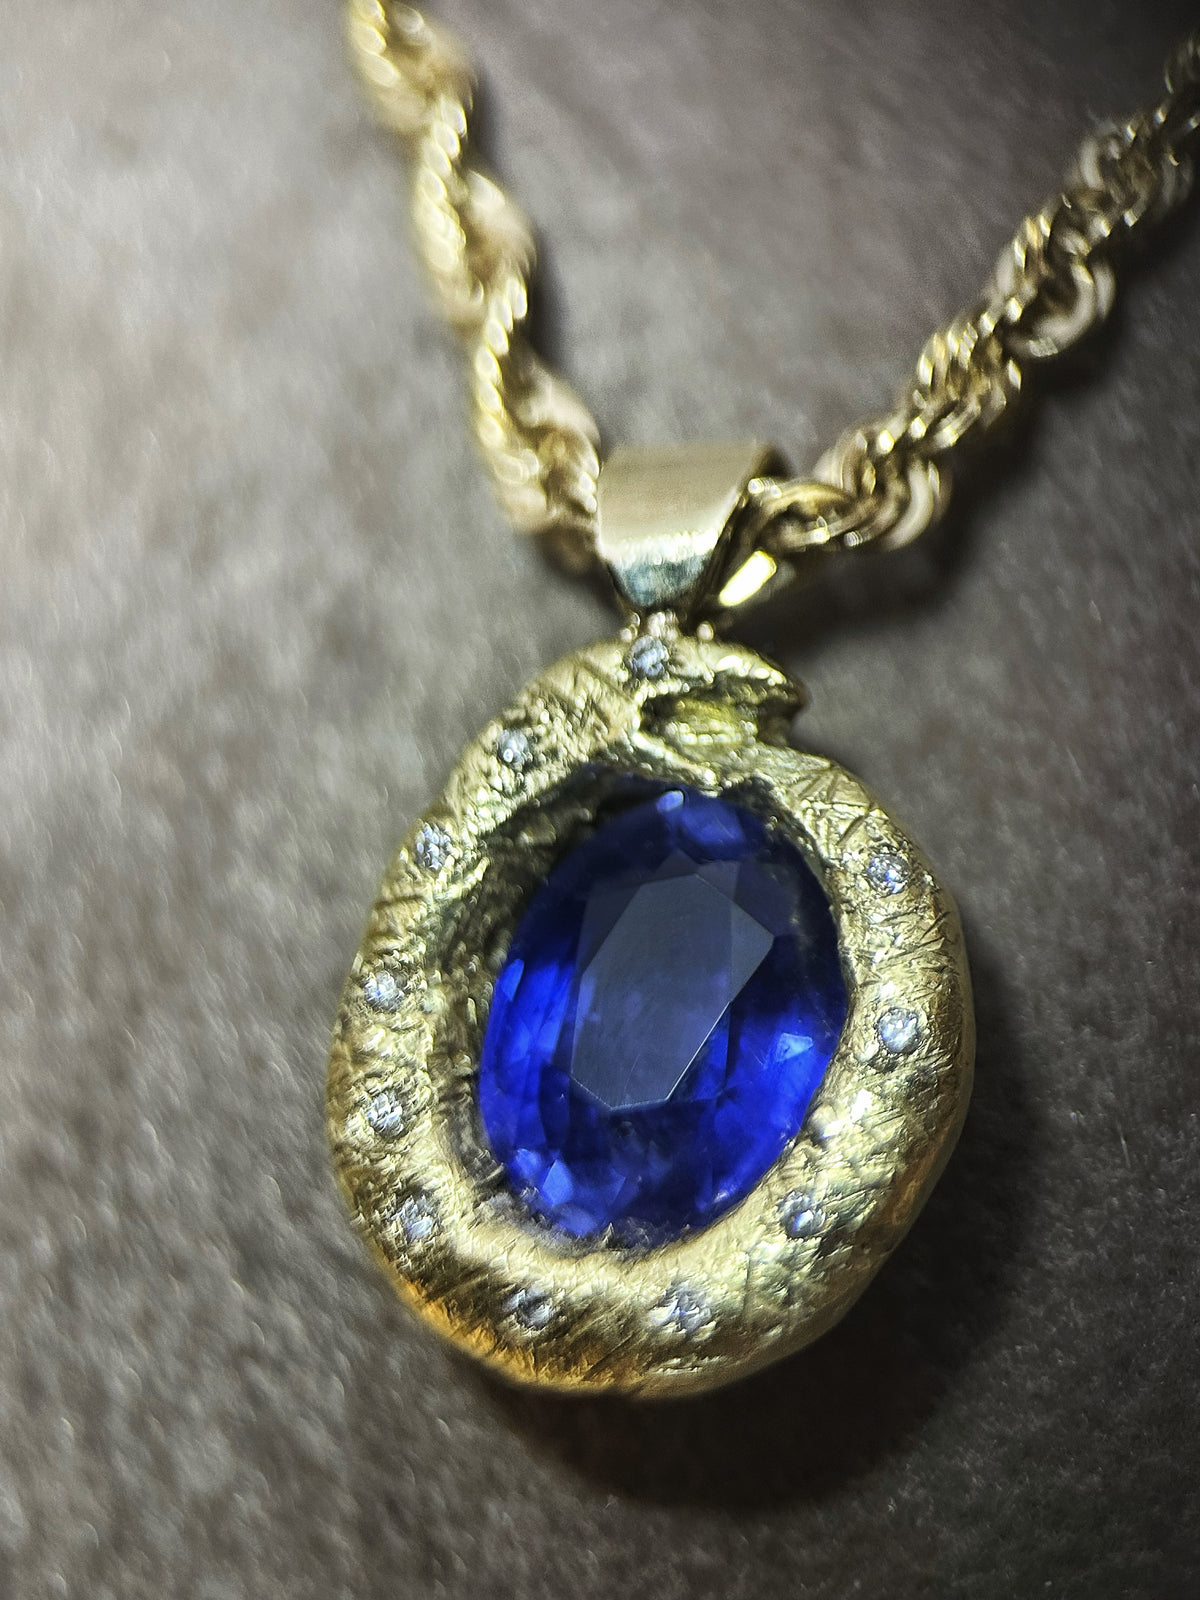 Ouroboros Blue Sapphire with Diamonds necklace in 14K Gold